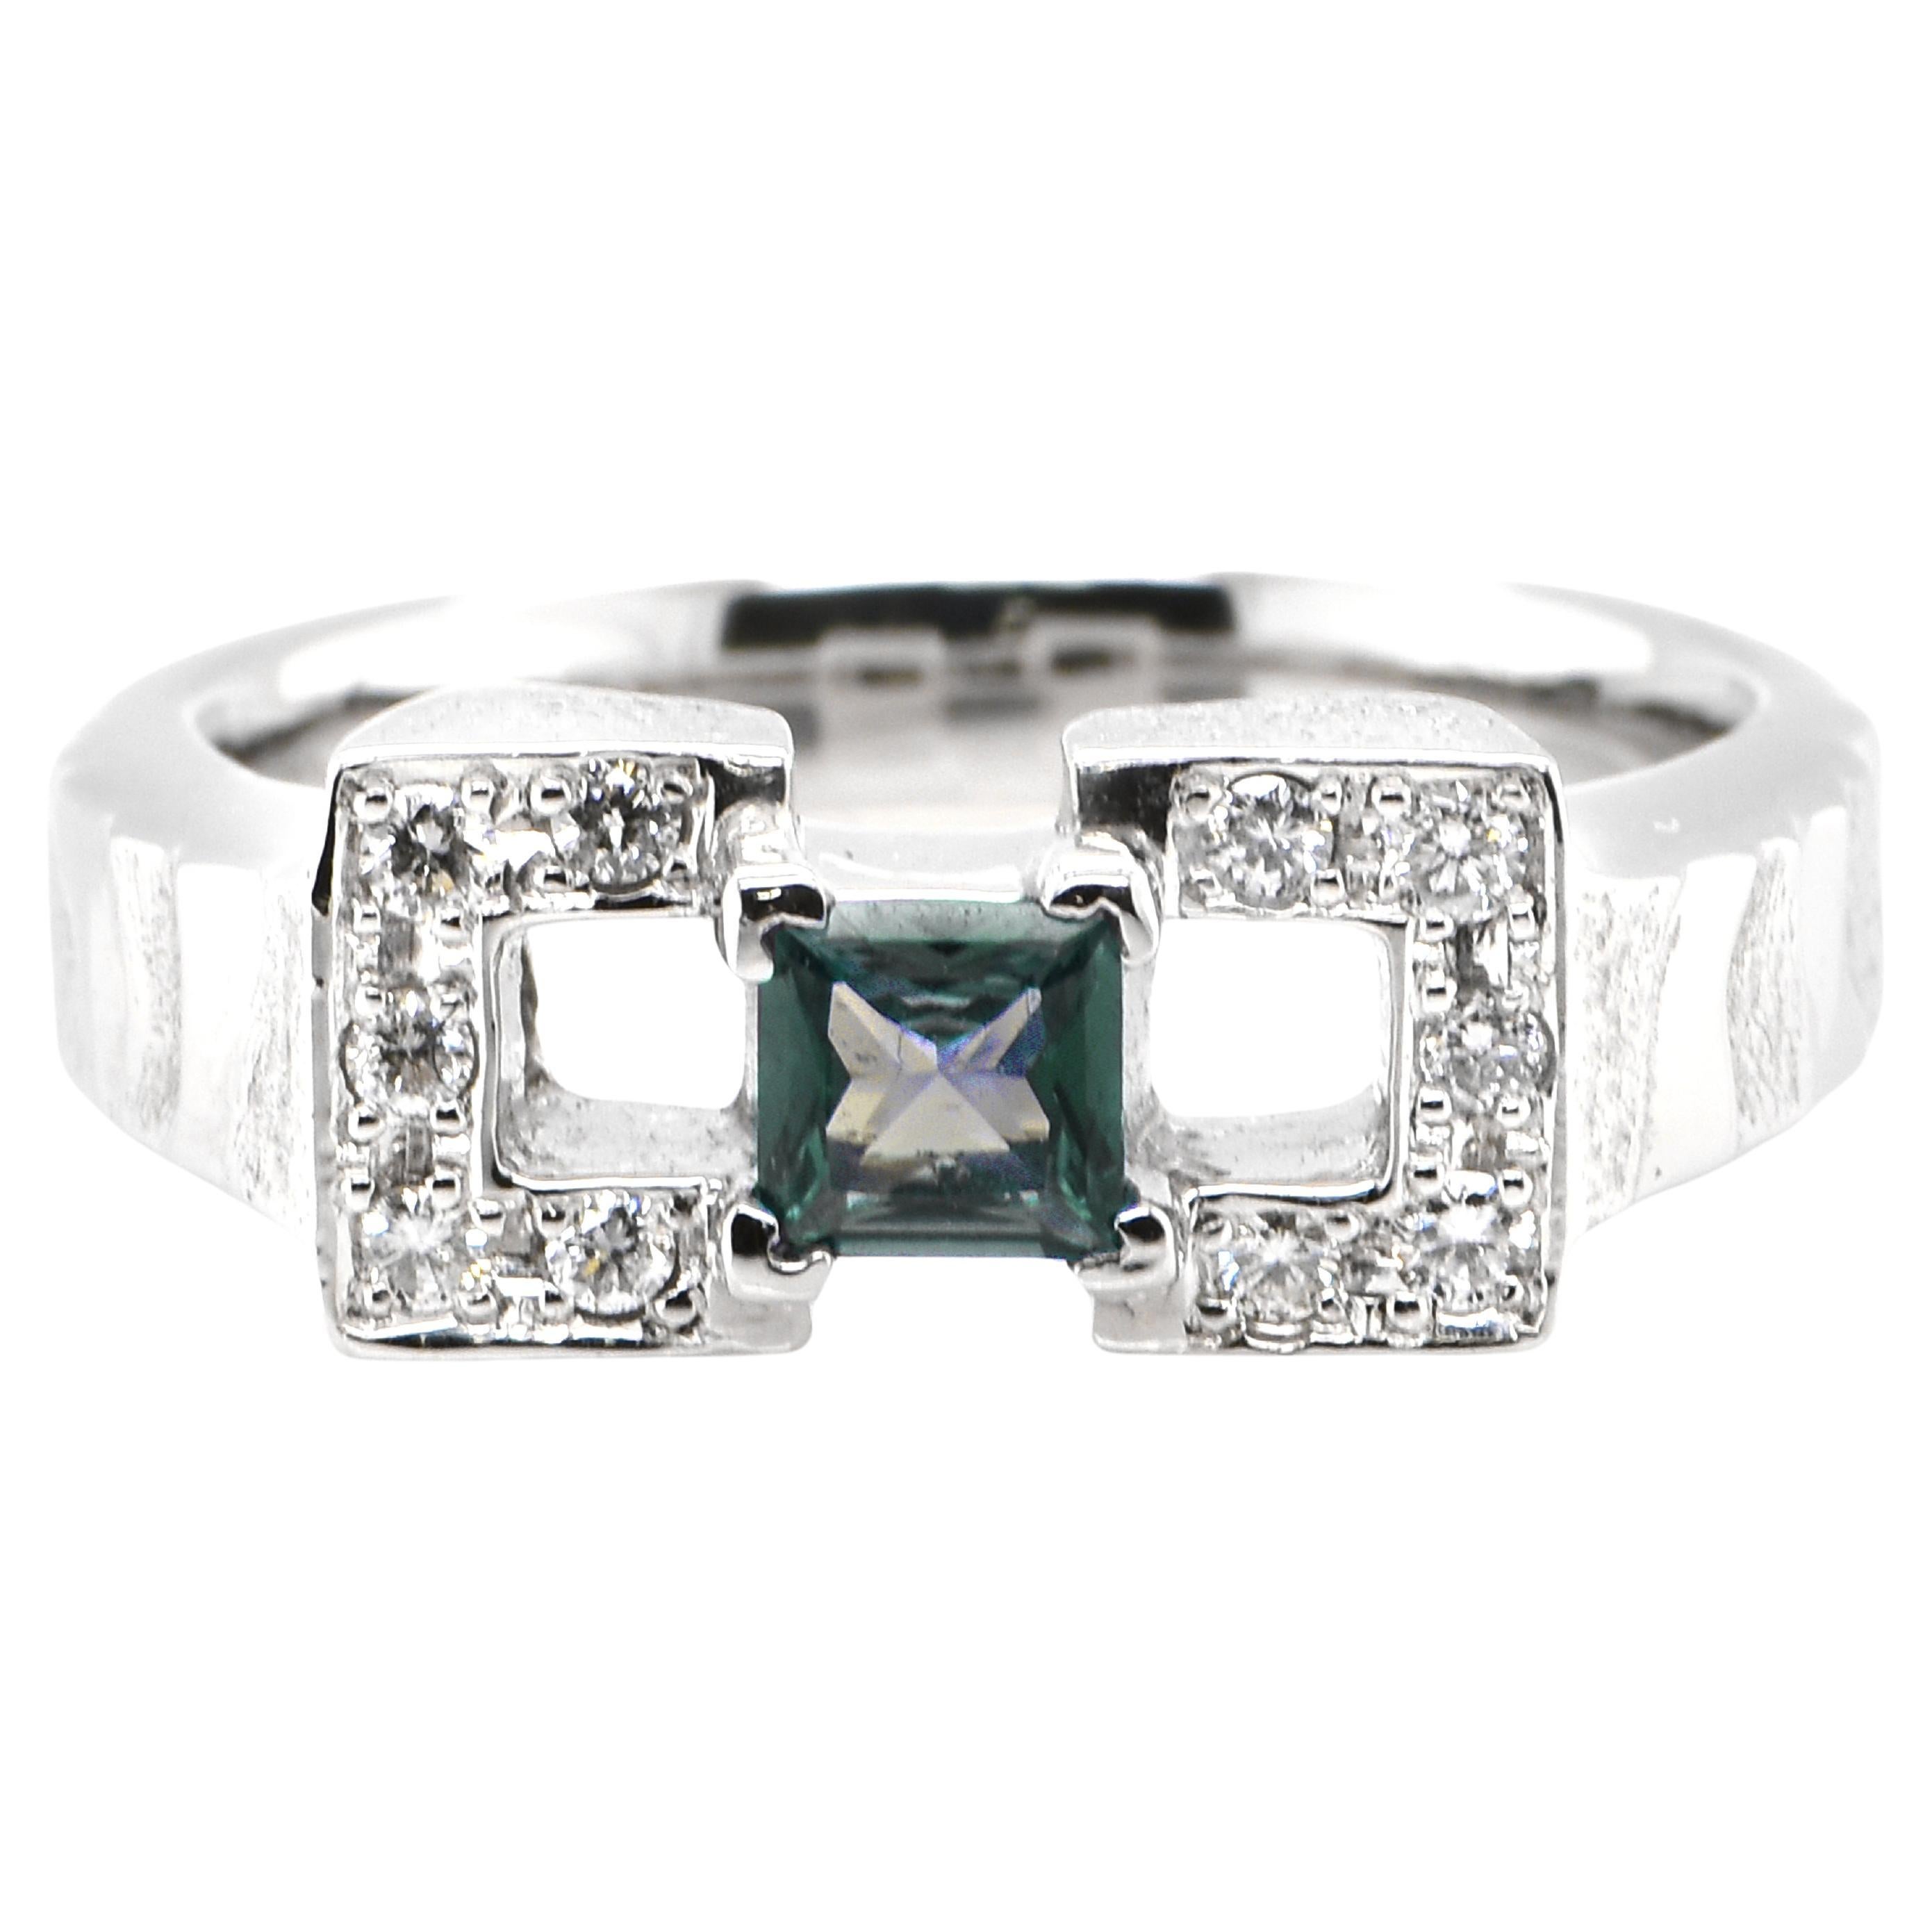 0.66 Carat Color-Changing Alexandrite and Diamond Ring set in Platinum